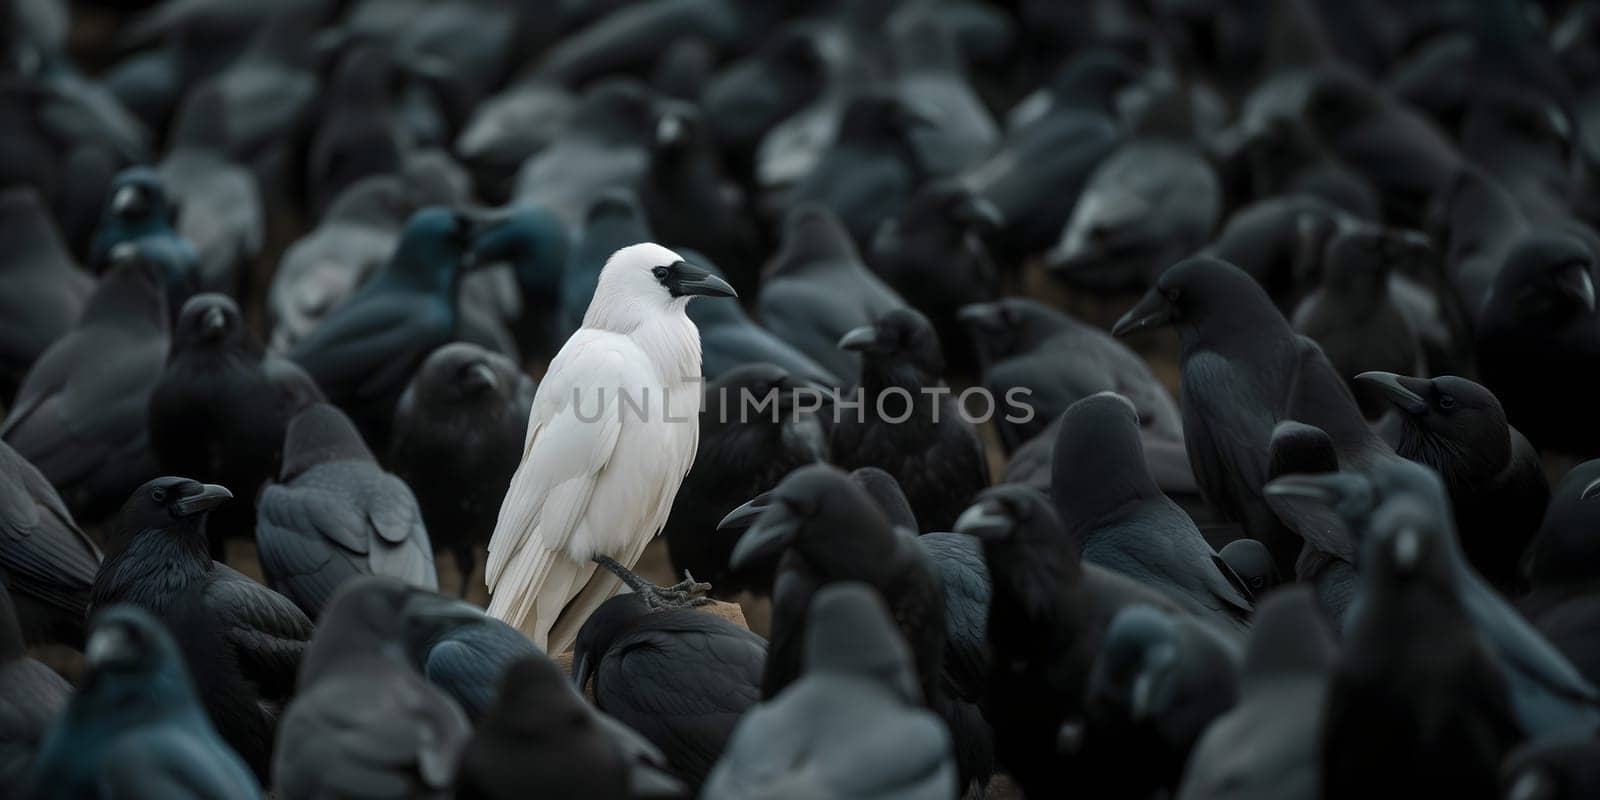 A white crow among many black crows. Neural network generated image. Not based on any actual scene or pattern.